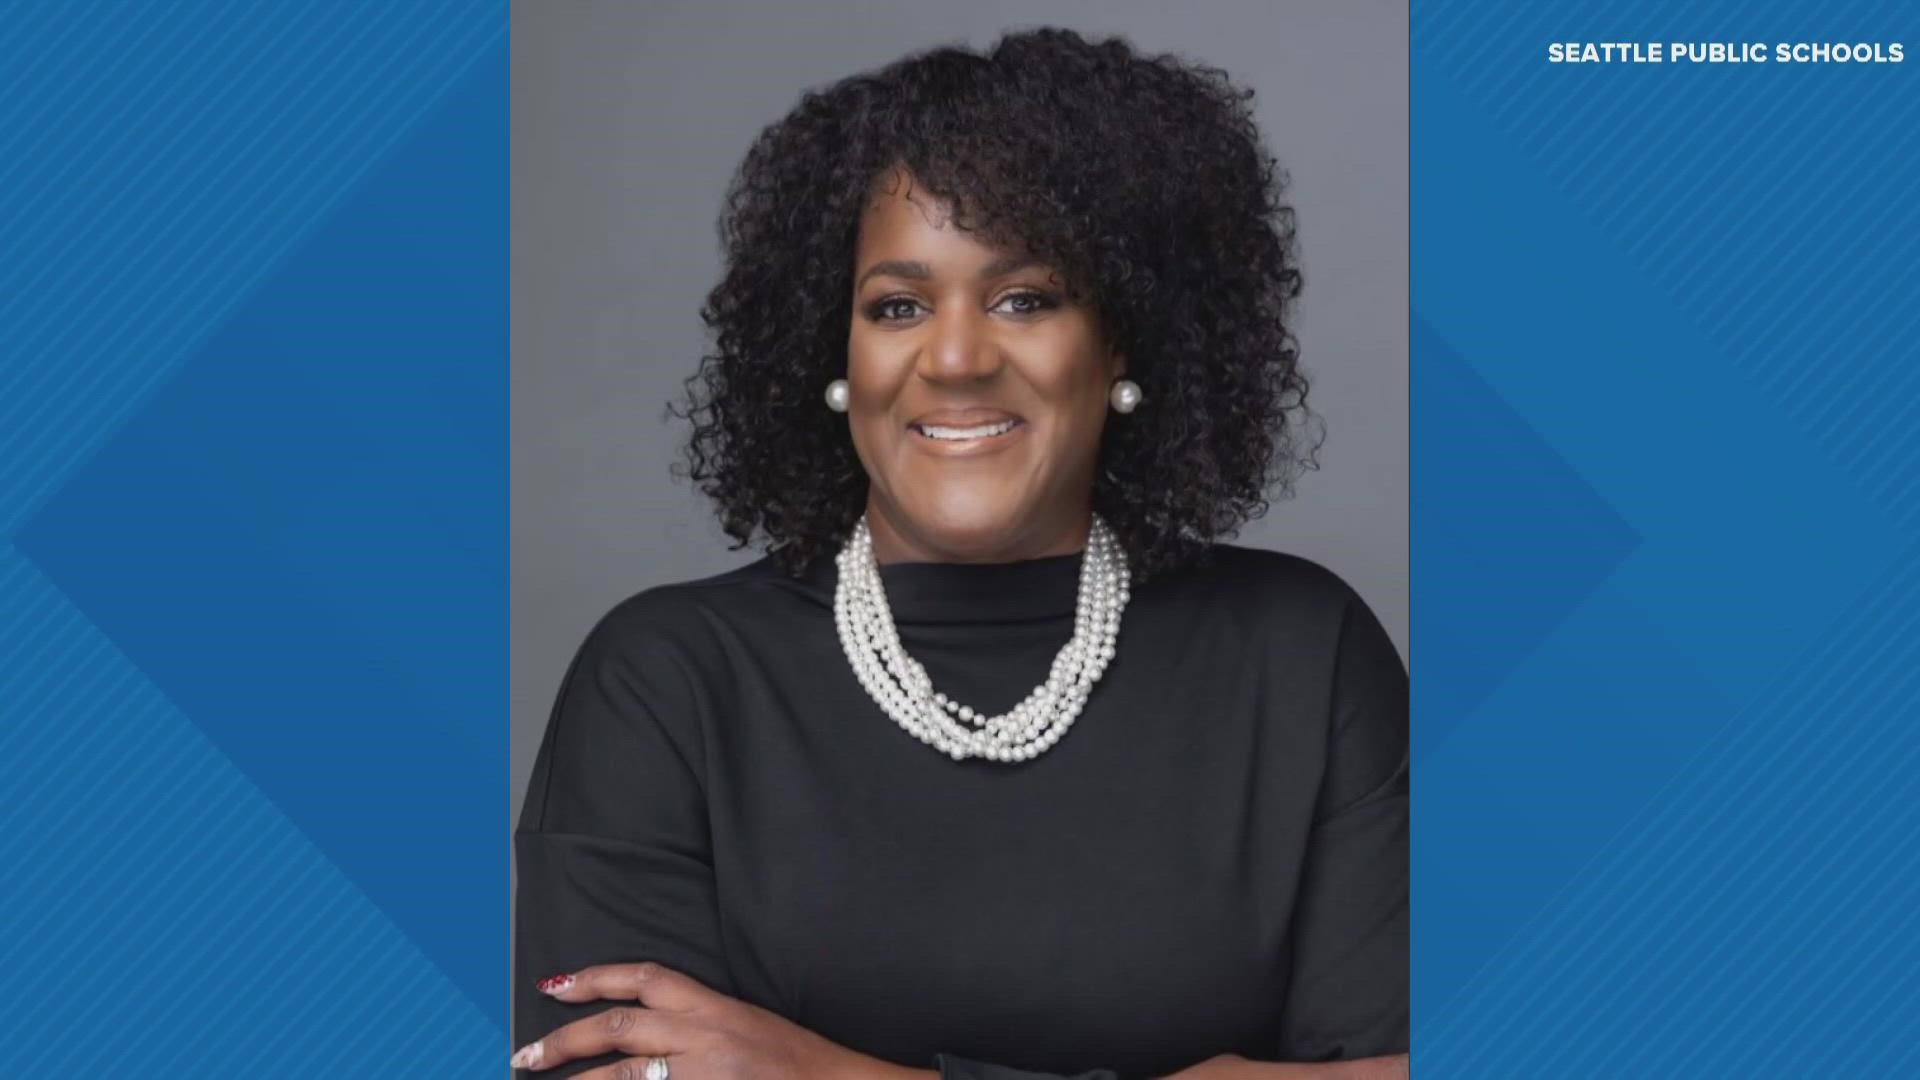 The St. Louis Board of Education announced on Wednesday that it has appointed Dr. Keisha Scarlett as the next superintendent of SLPS. She officially starts July 1.